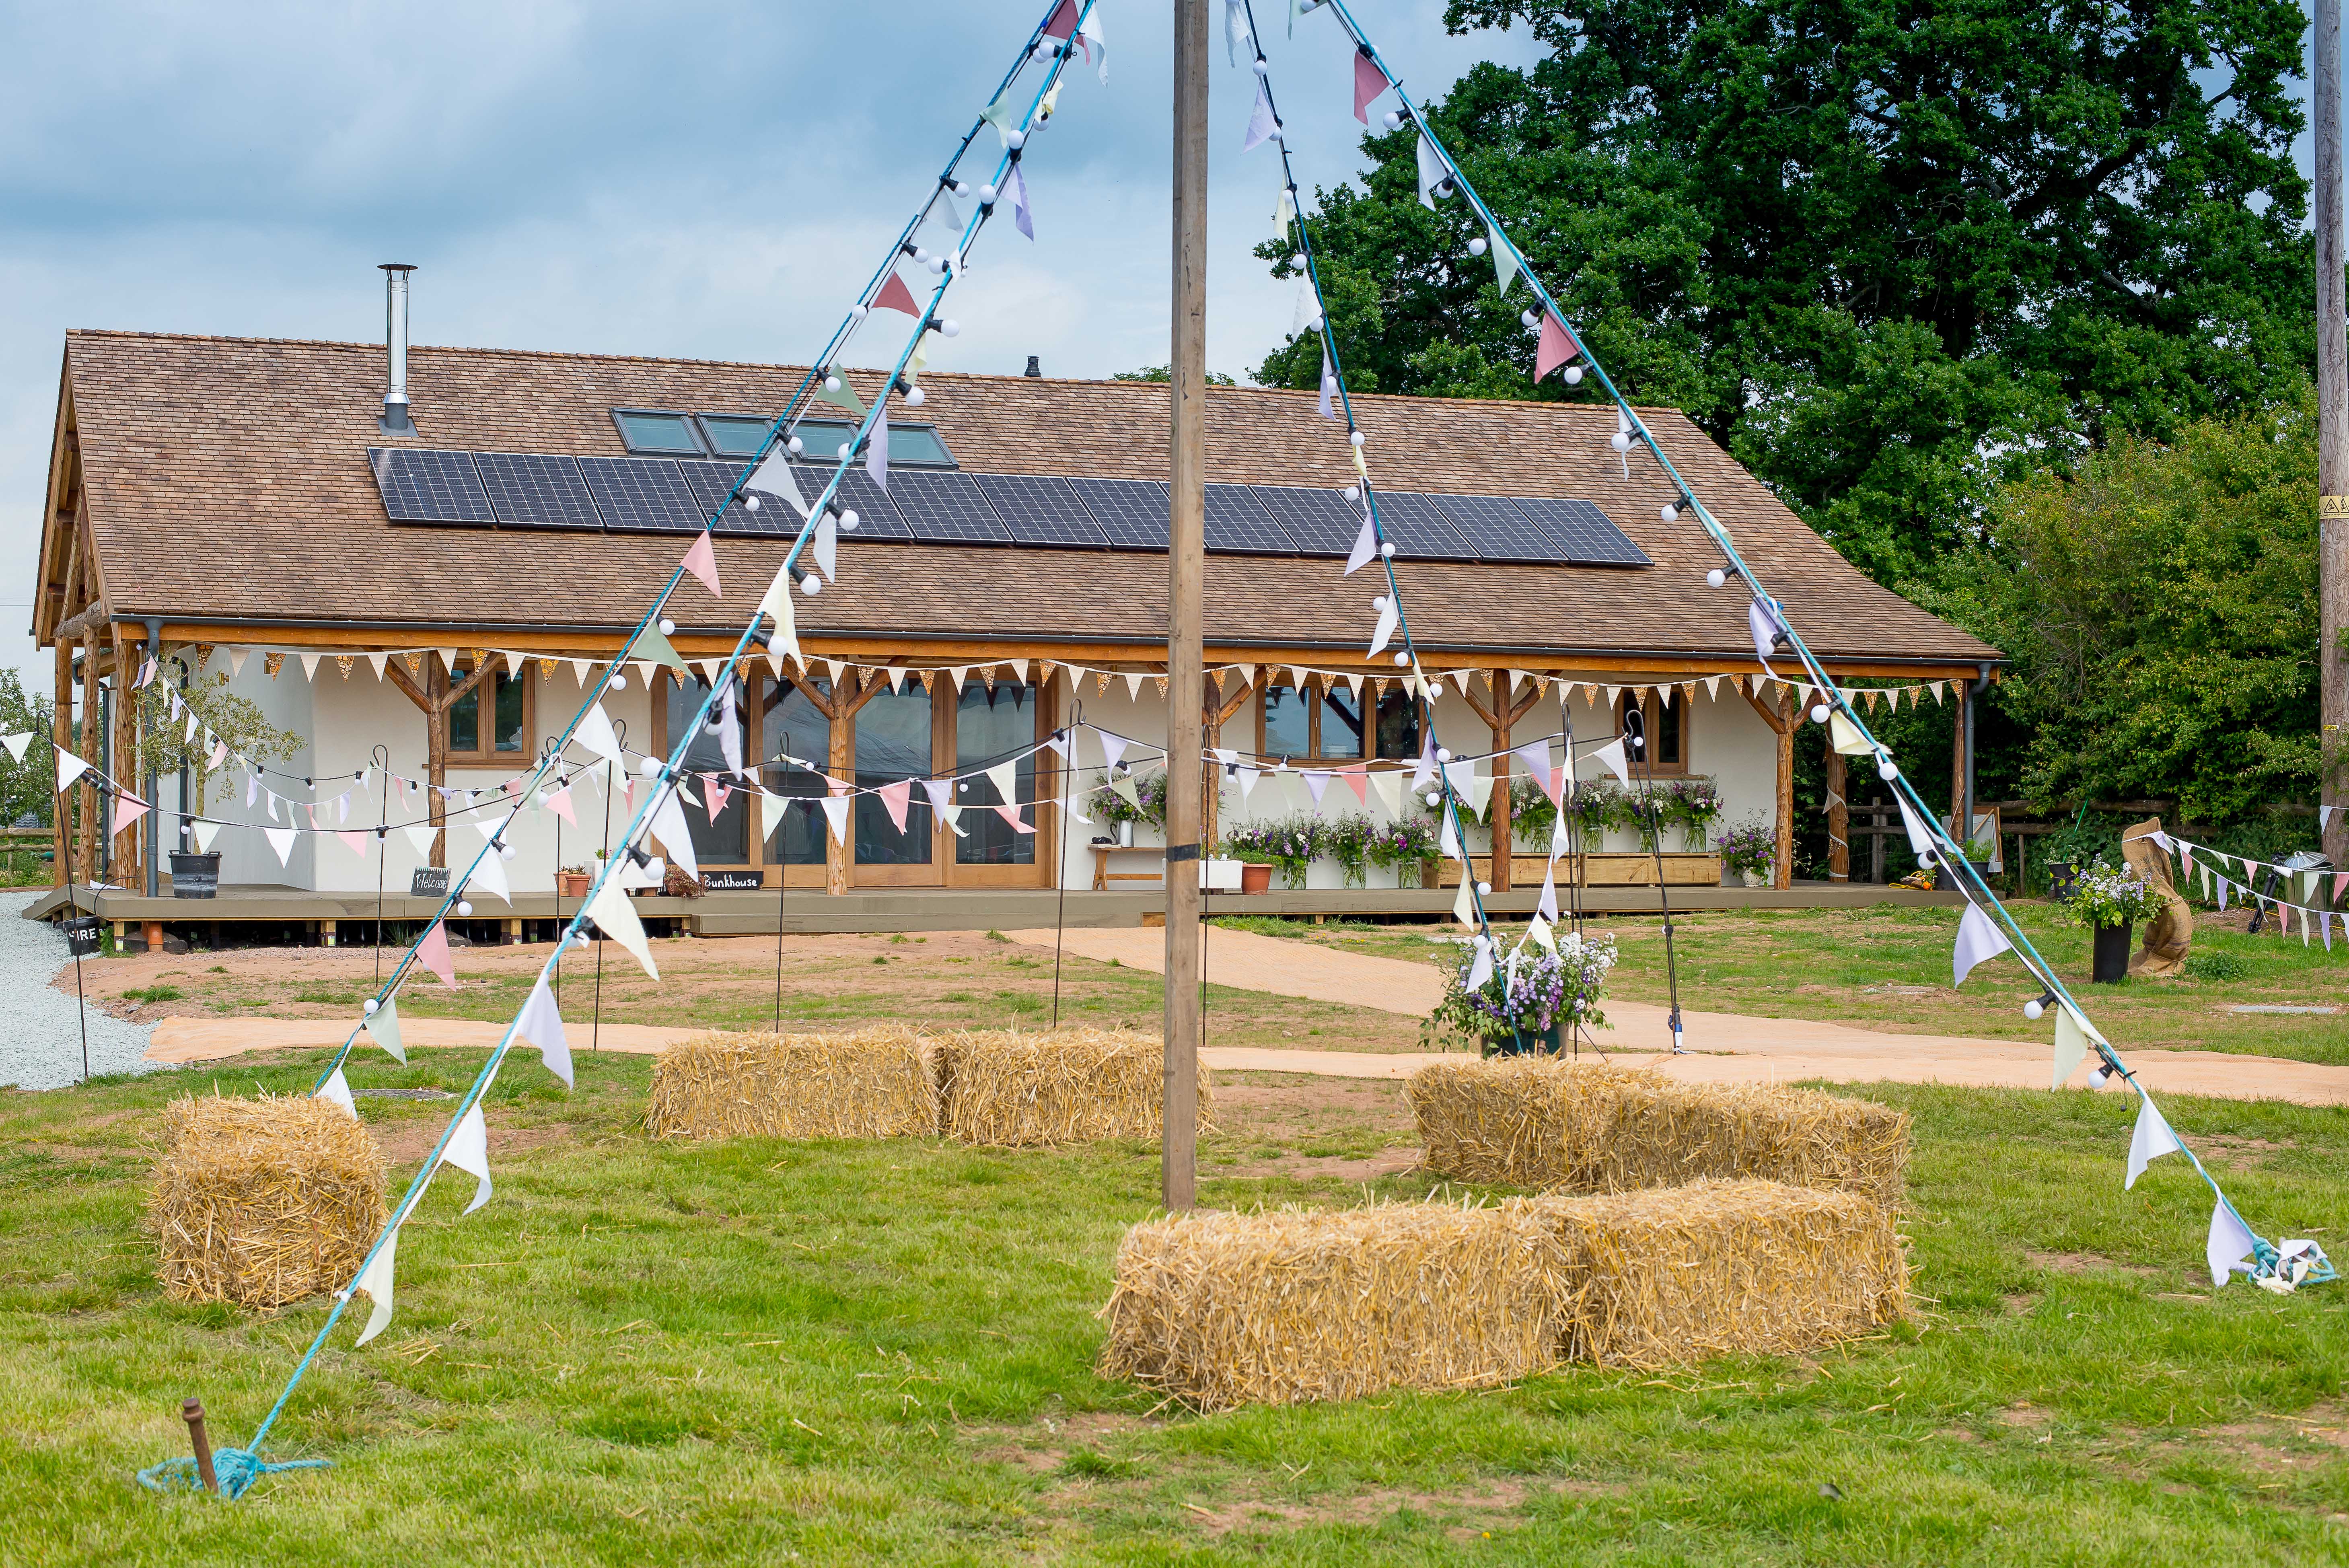 One of Britain’s biggest straw-buildings to open for community groups and eco-weddings @fordhallfarm